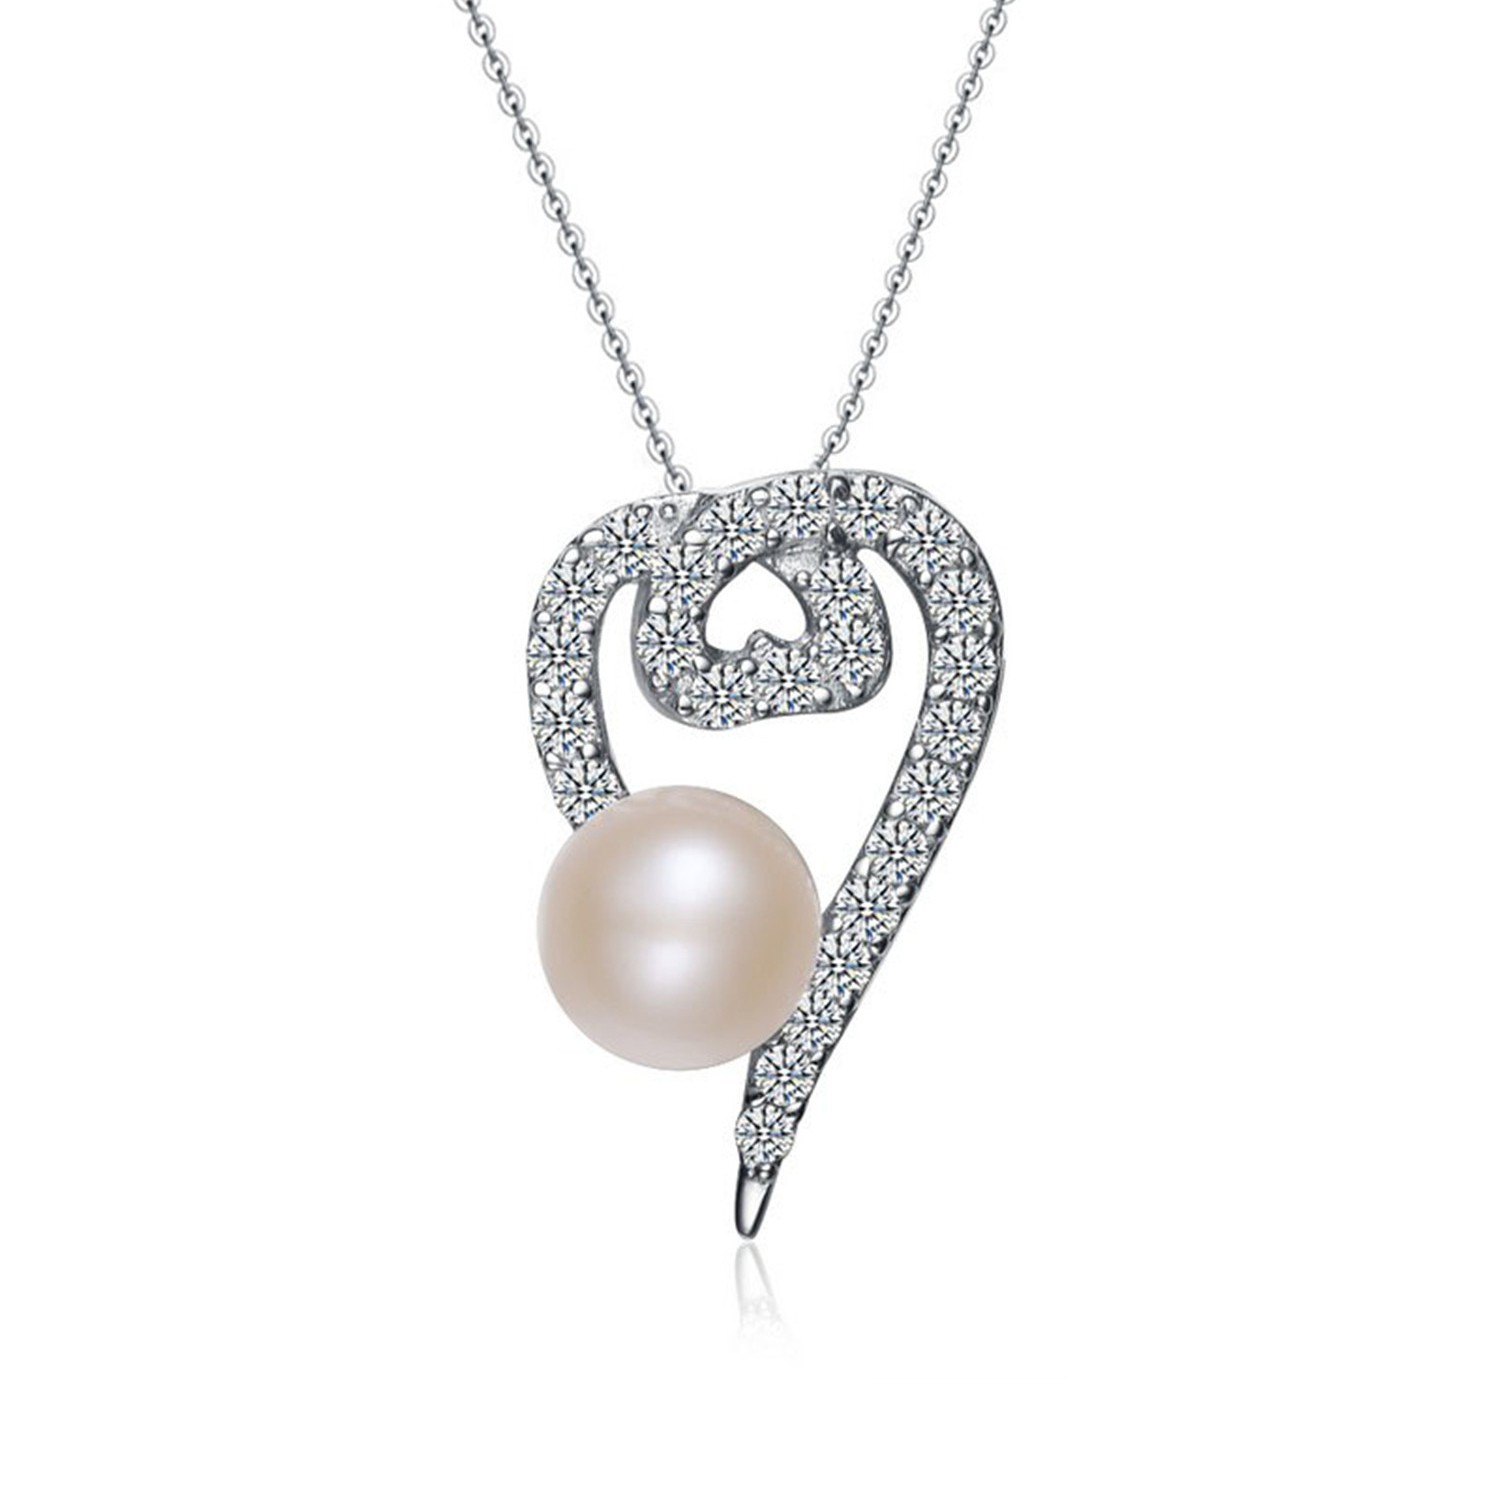 Pearl necklace jewelry wholesale for women silver plated 925 silver pendent necklace